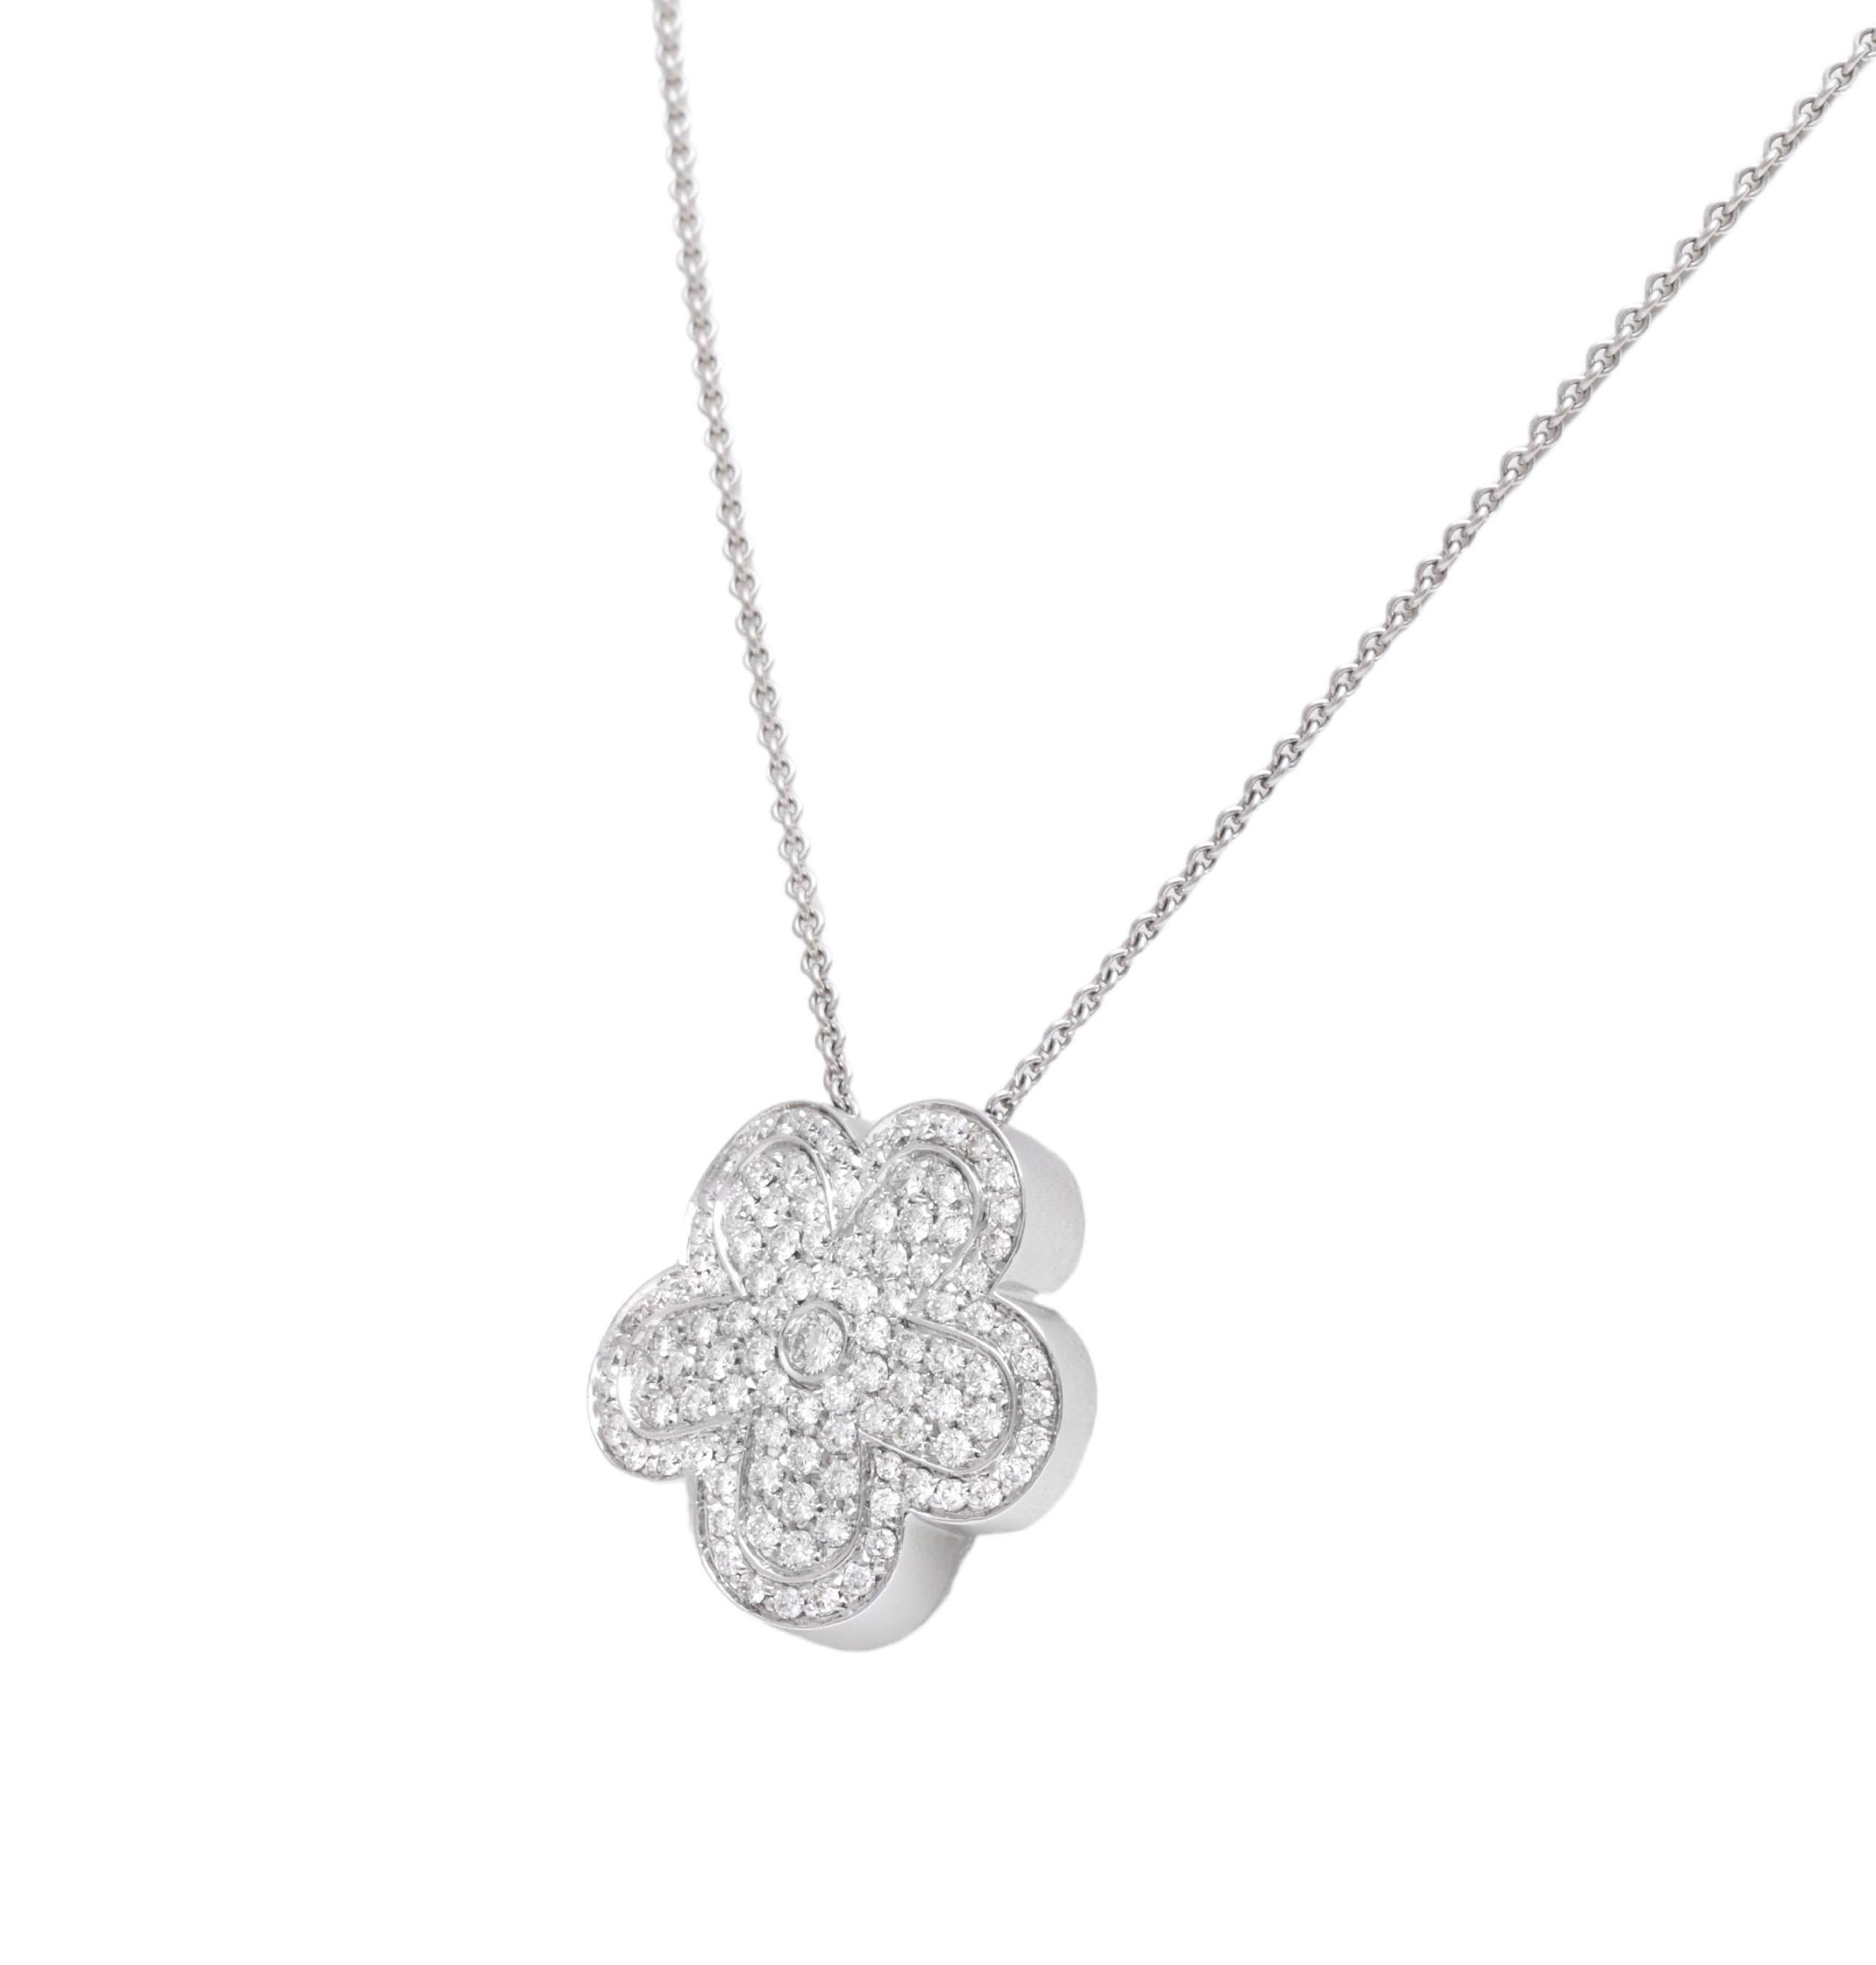 Women's or Men's 18 kt. White Gold Flower Pendant / Necklace With 1.18 ct. Diamonds For Sale